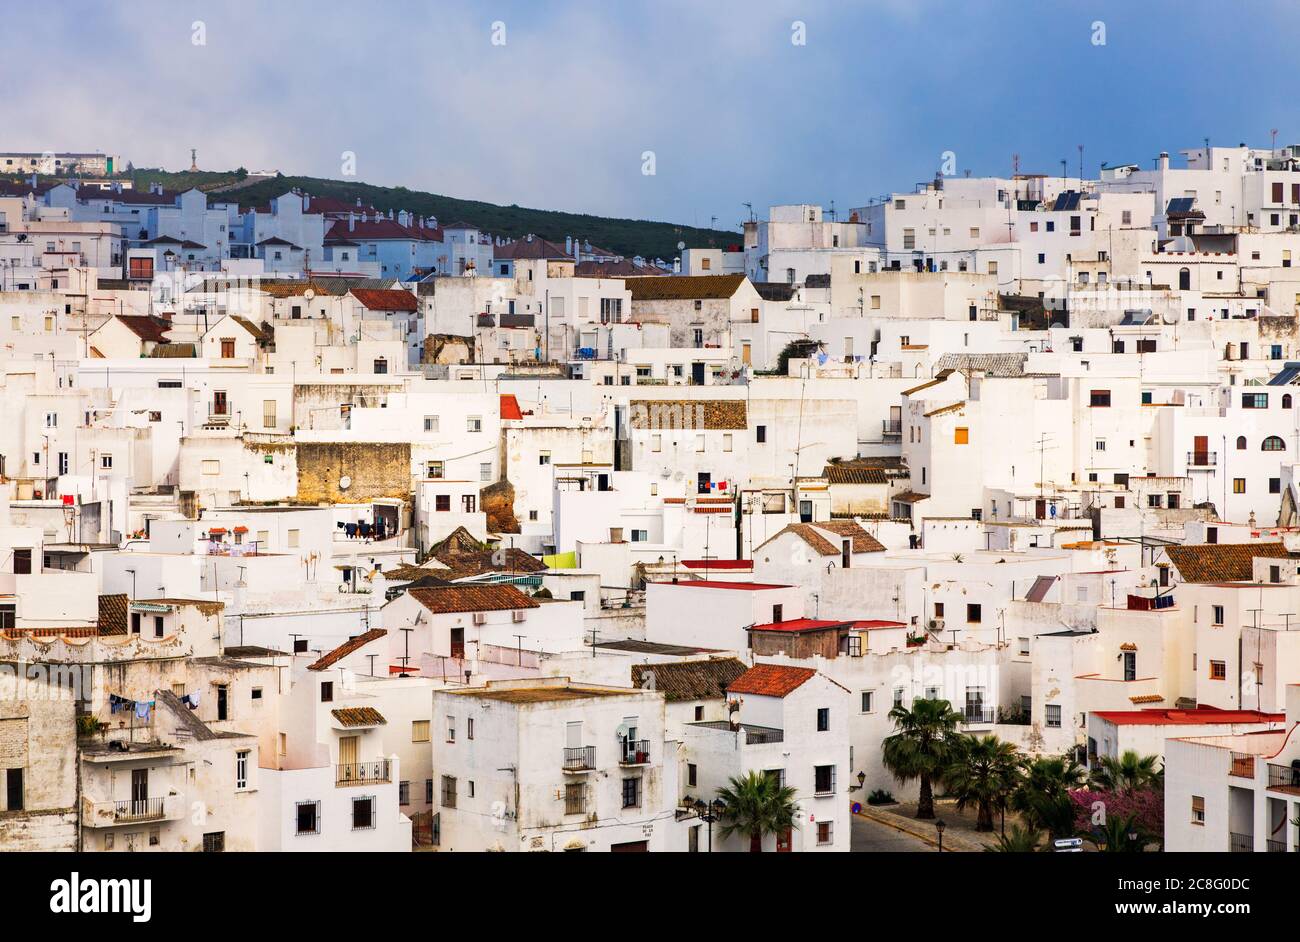 geography / travel, Spain, Misty conditions over the whitewashed village of Vejer de la Frontera create an interesting col, No-Tourism-Advertising-Use Stock Photo